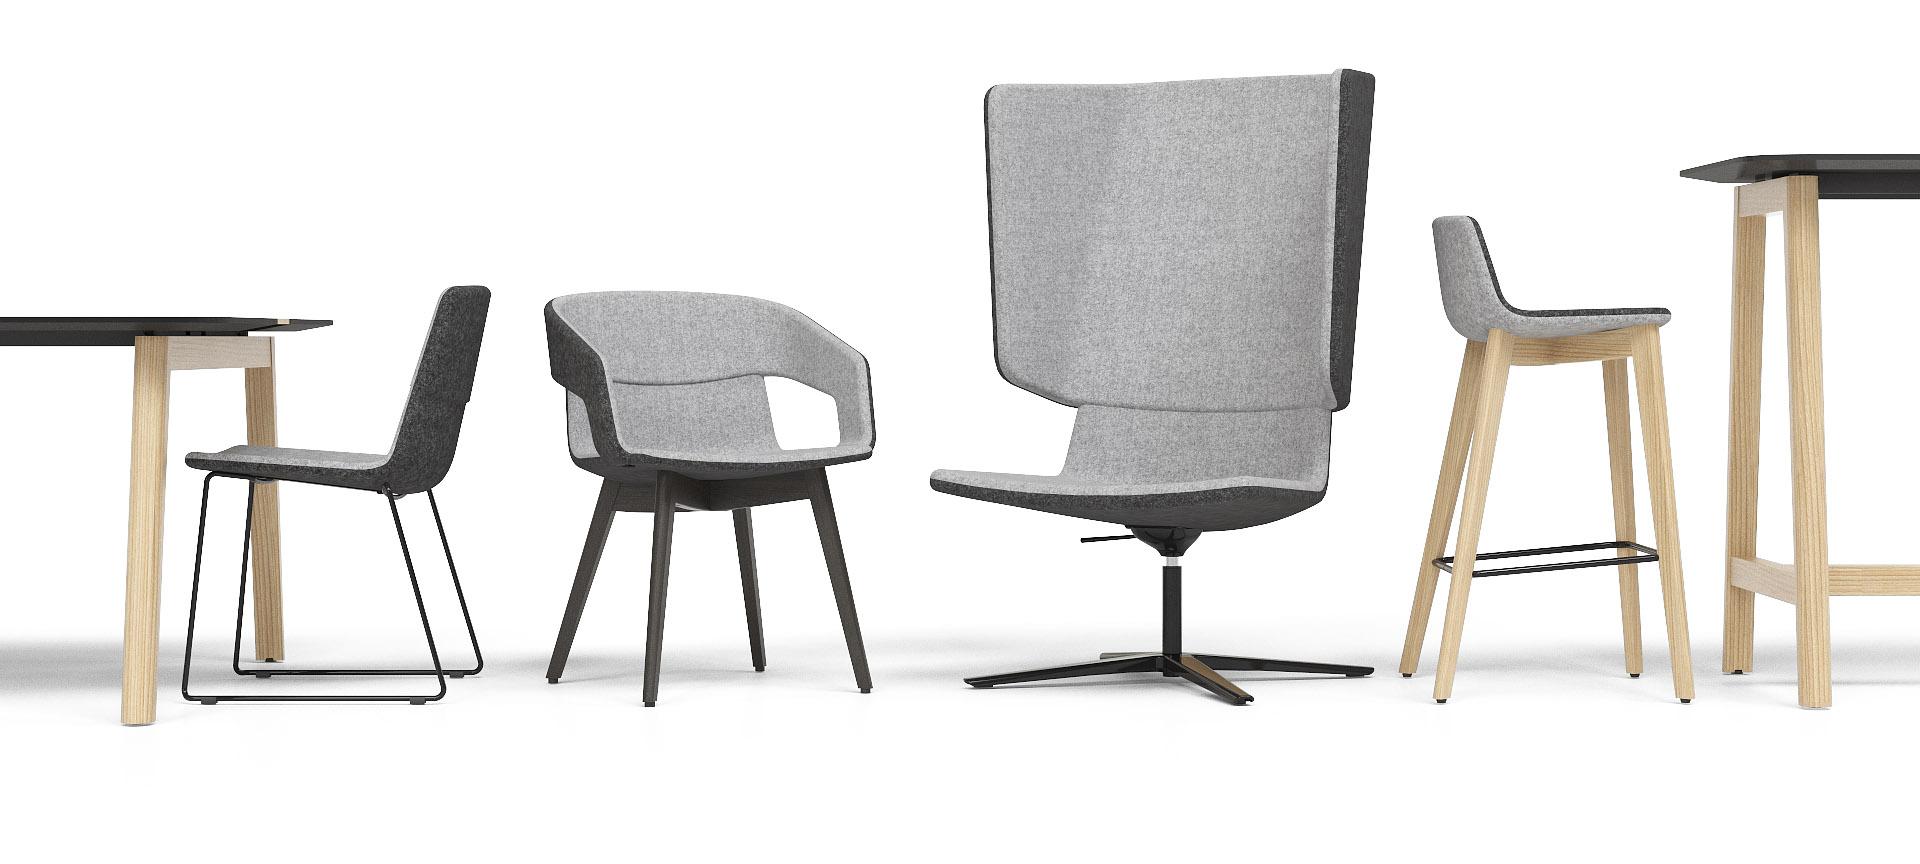 Twist&Sit full range of lounge and meeting chairs in different shapes and sizes